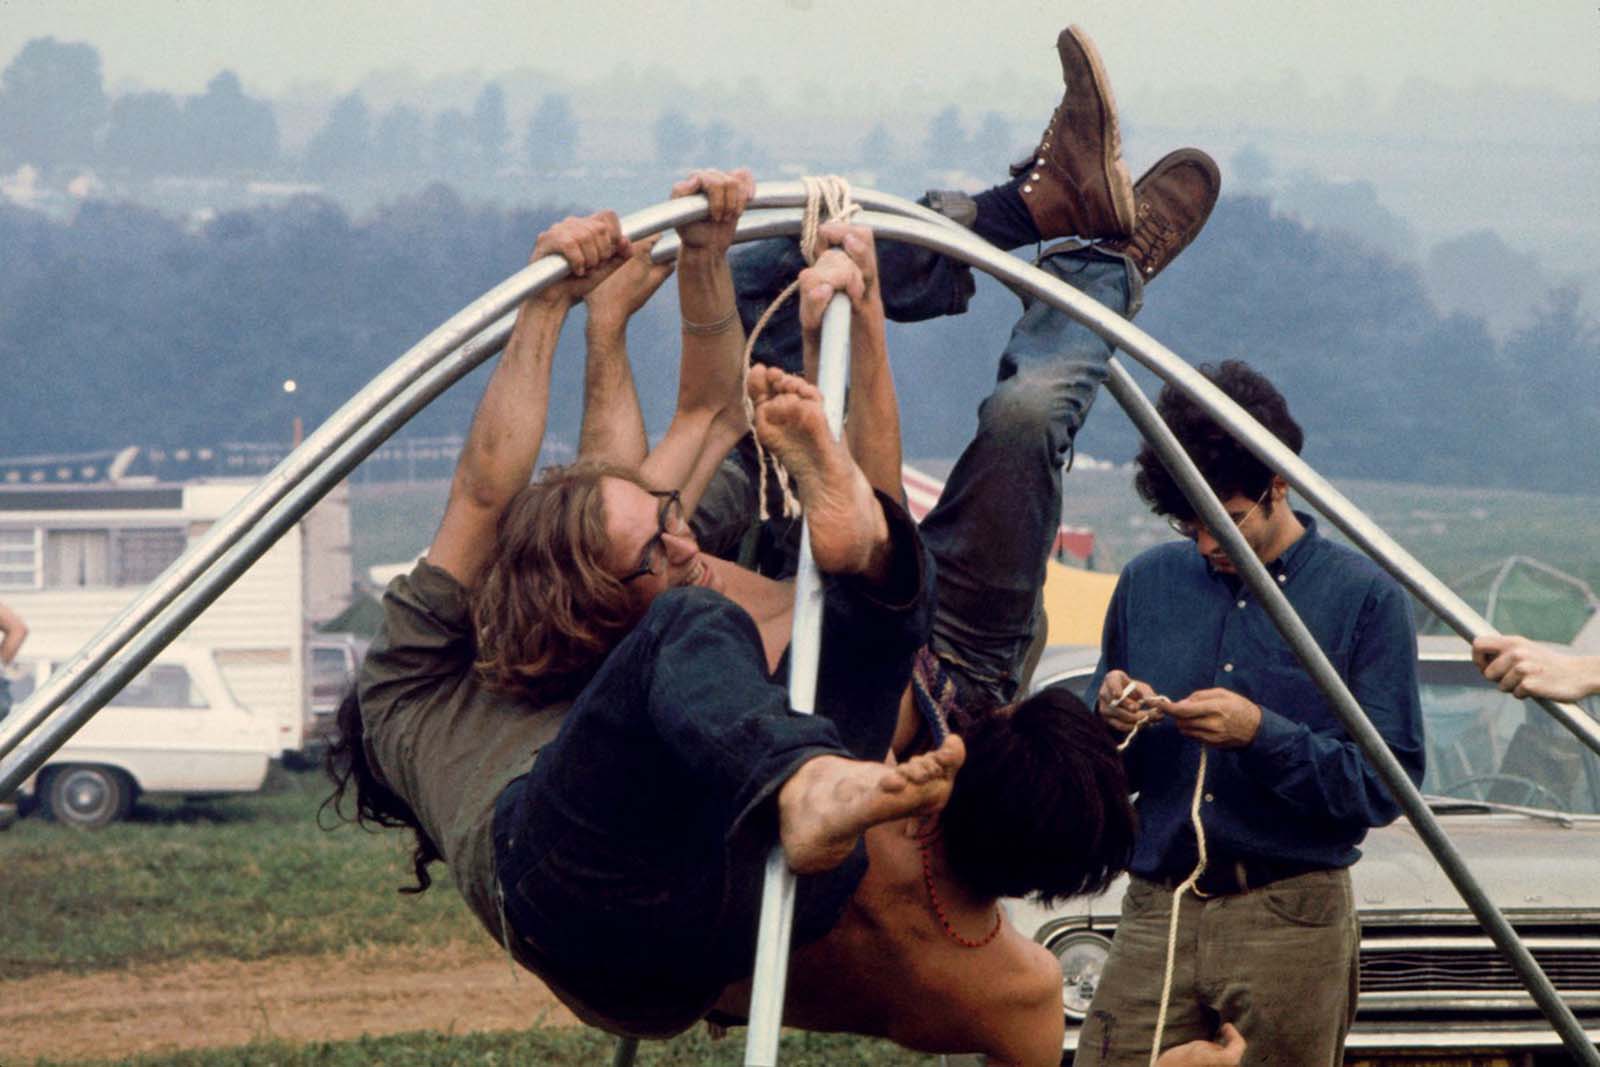 Festivalgoers hang from bent metal tubing as another untangles rope to tie the tubes together to form a tent frame on the grounds of the Woodstock Festival in August 1969.